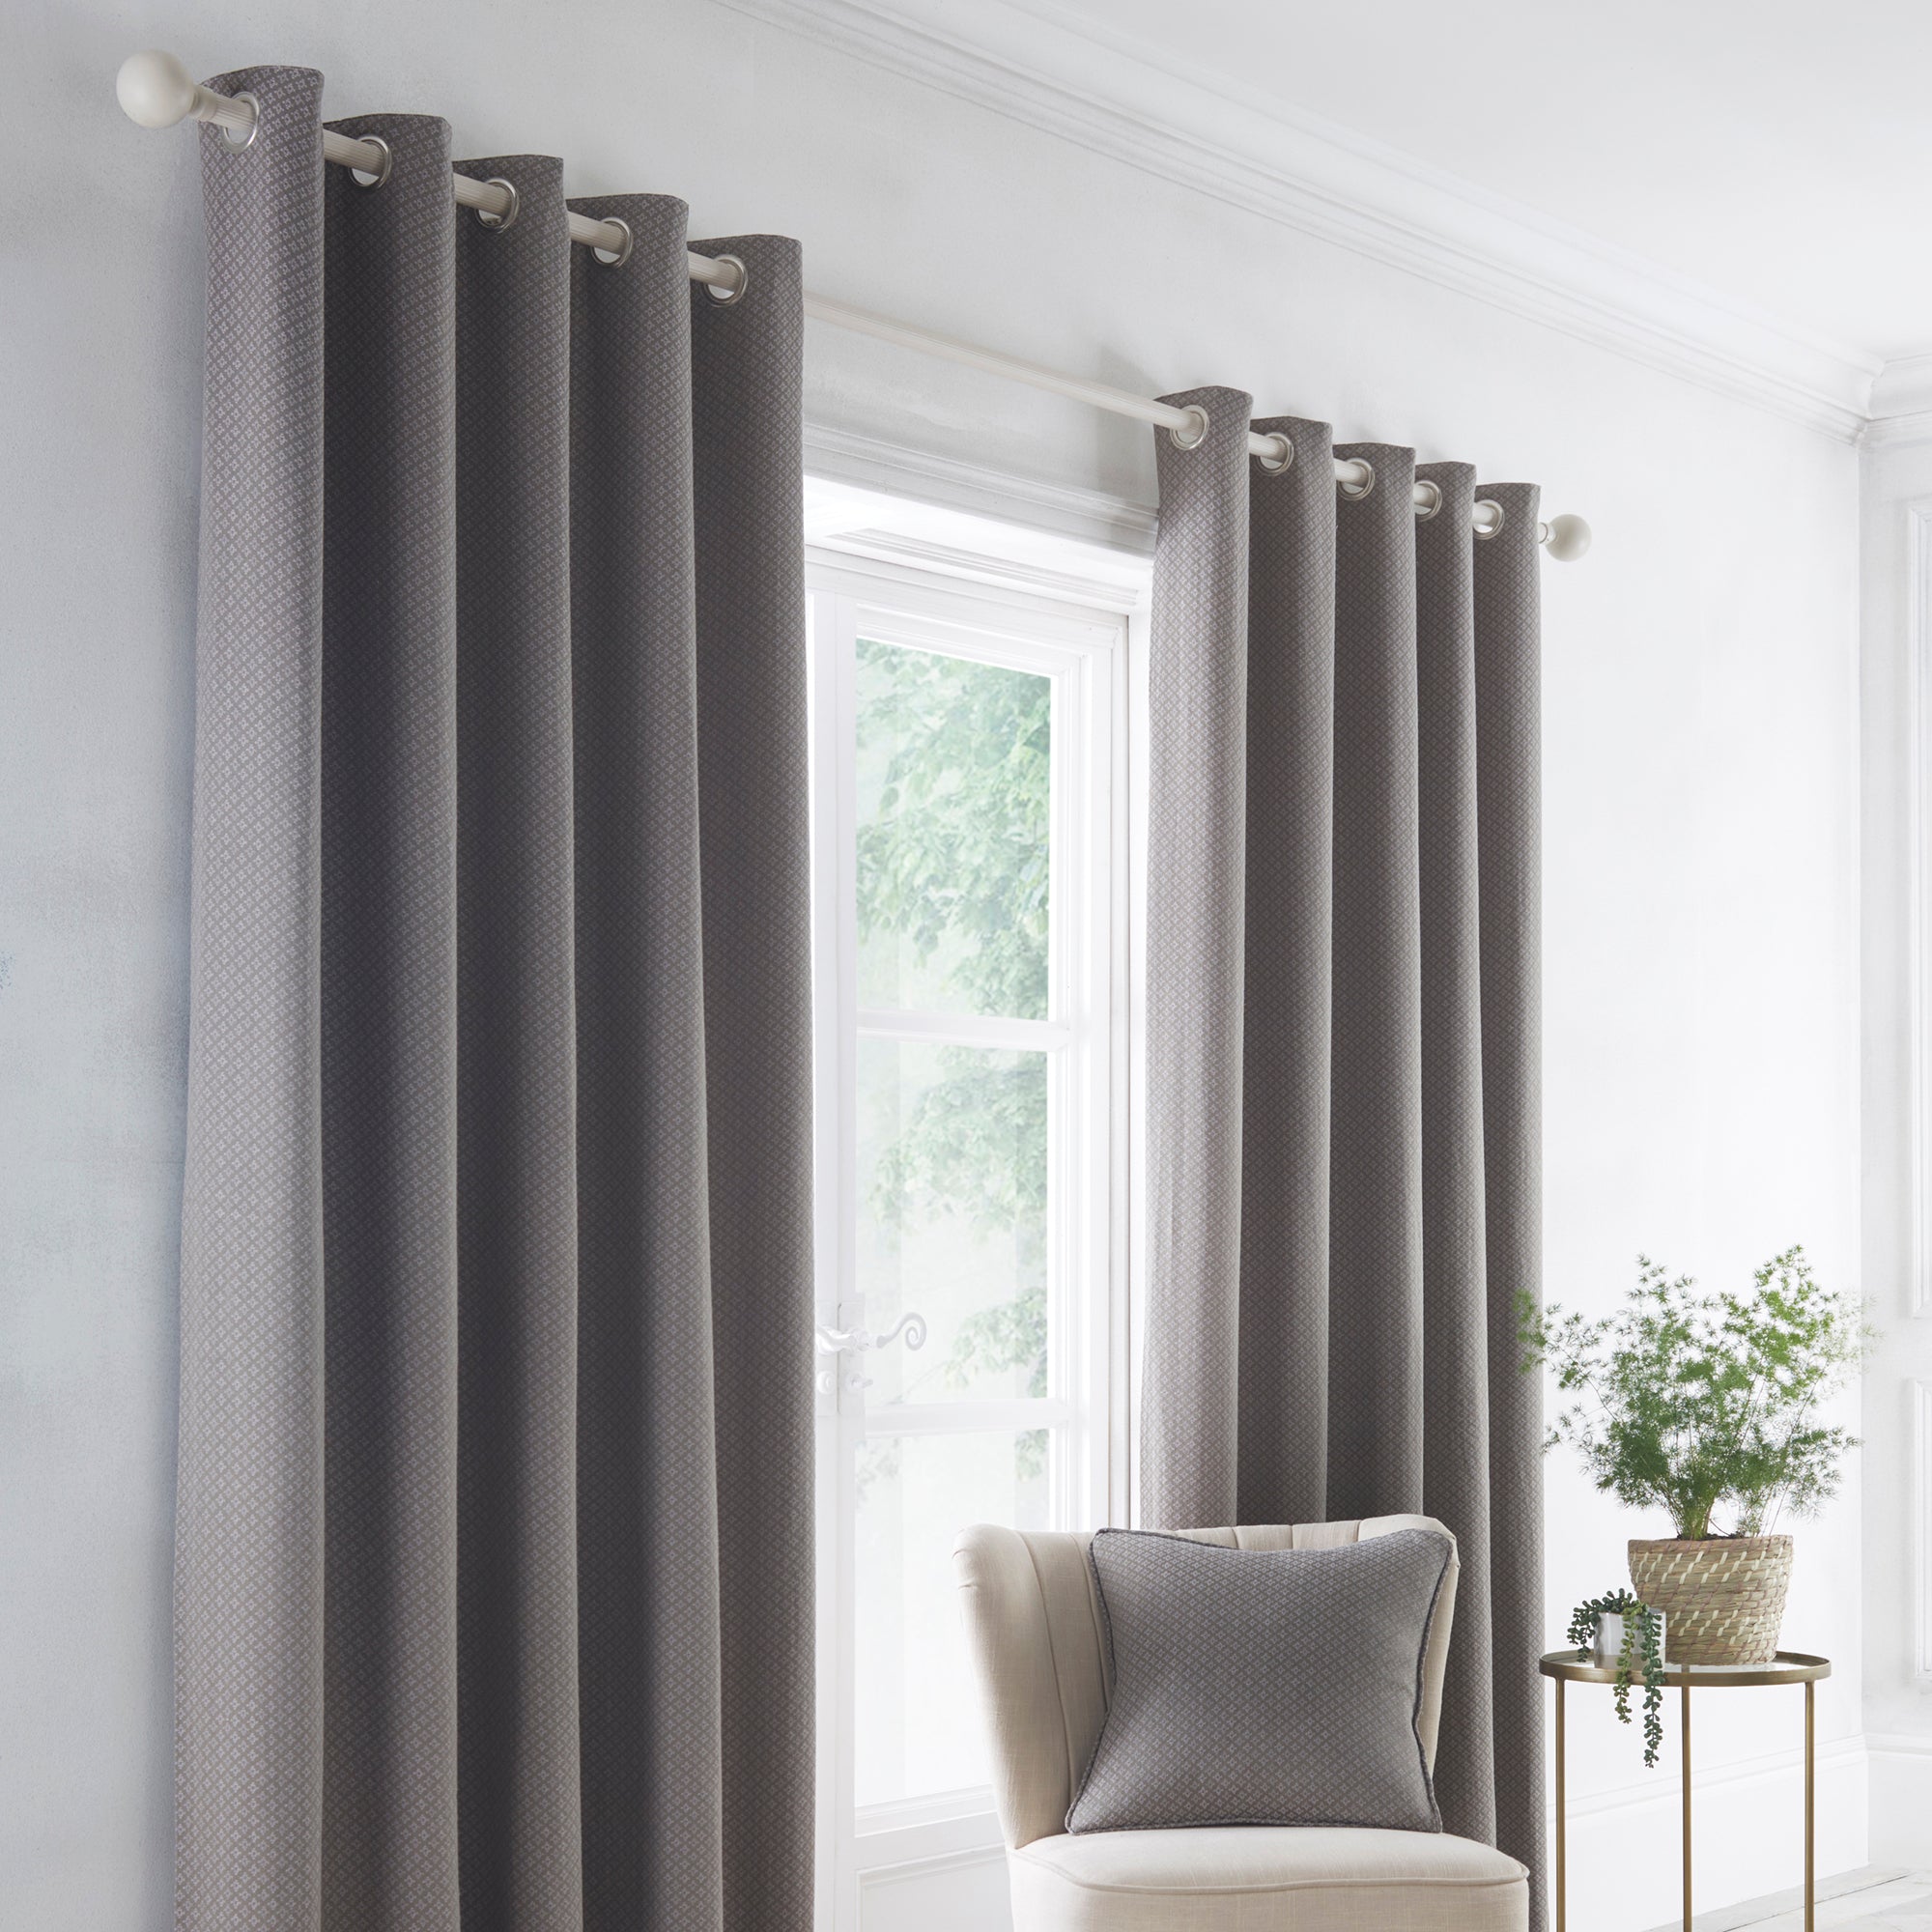 Indiana - Jacquard Pair of Eyelet Curtains in Grey - by D&D Design